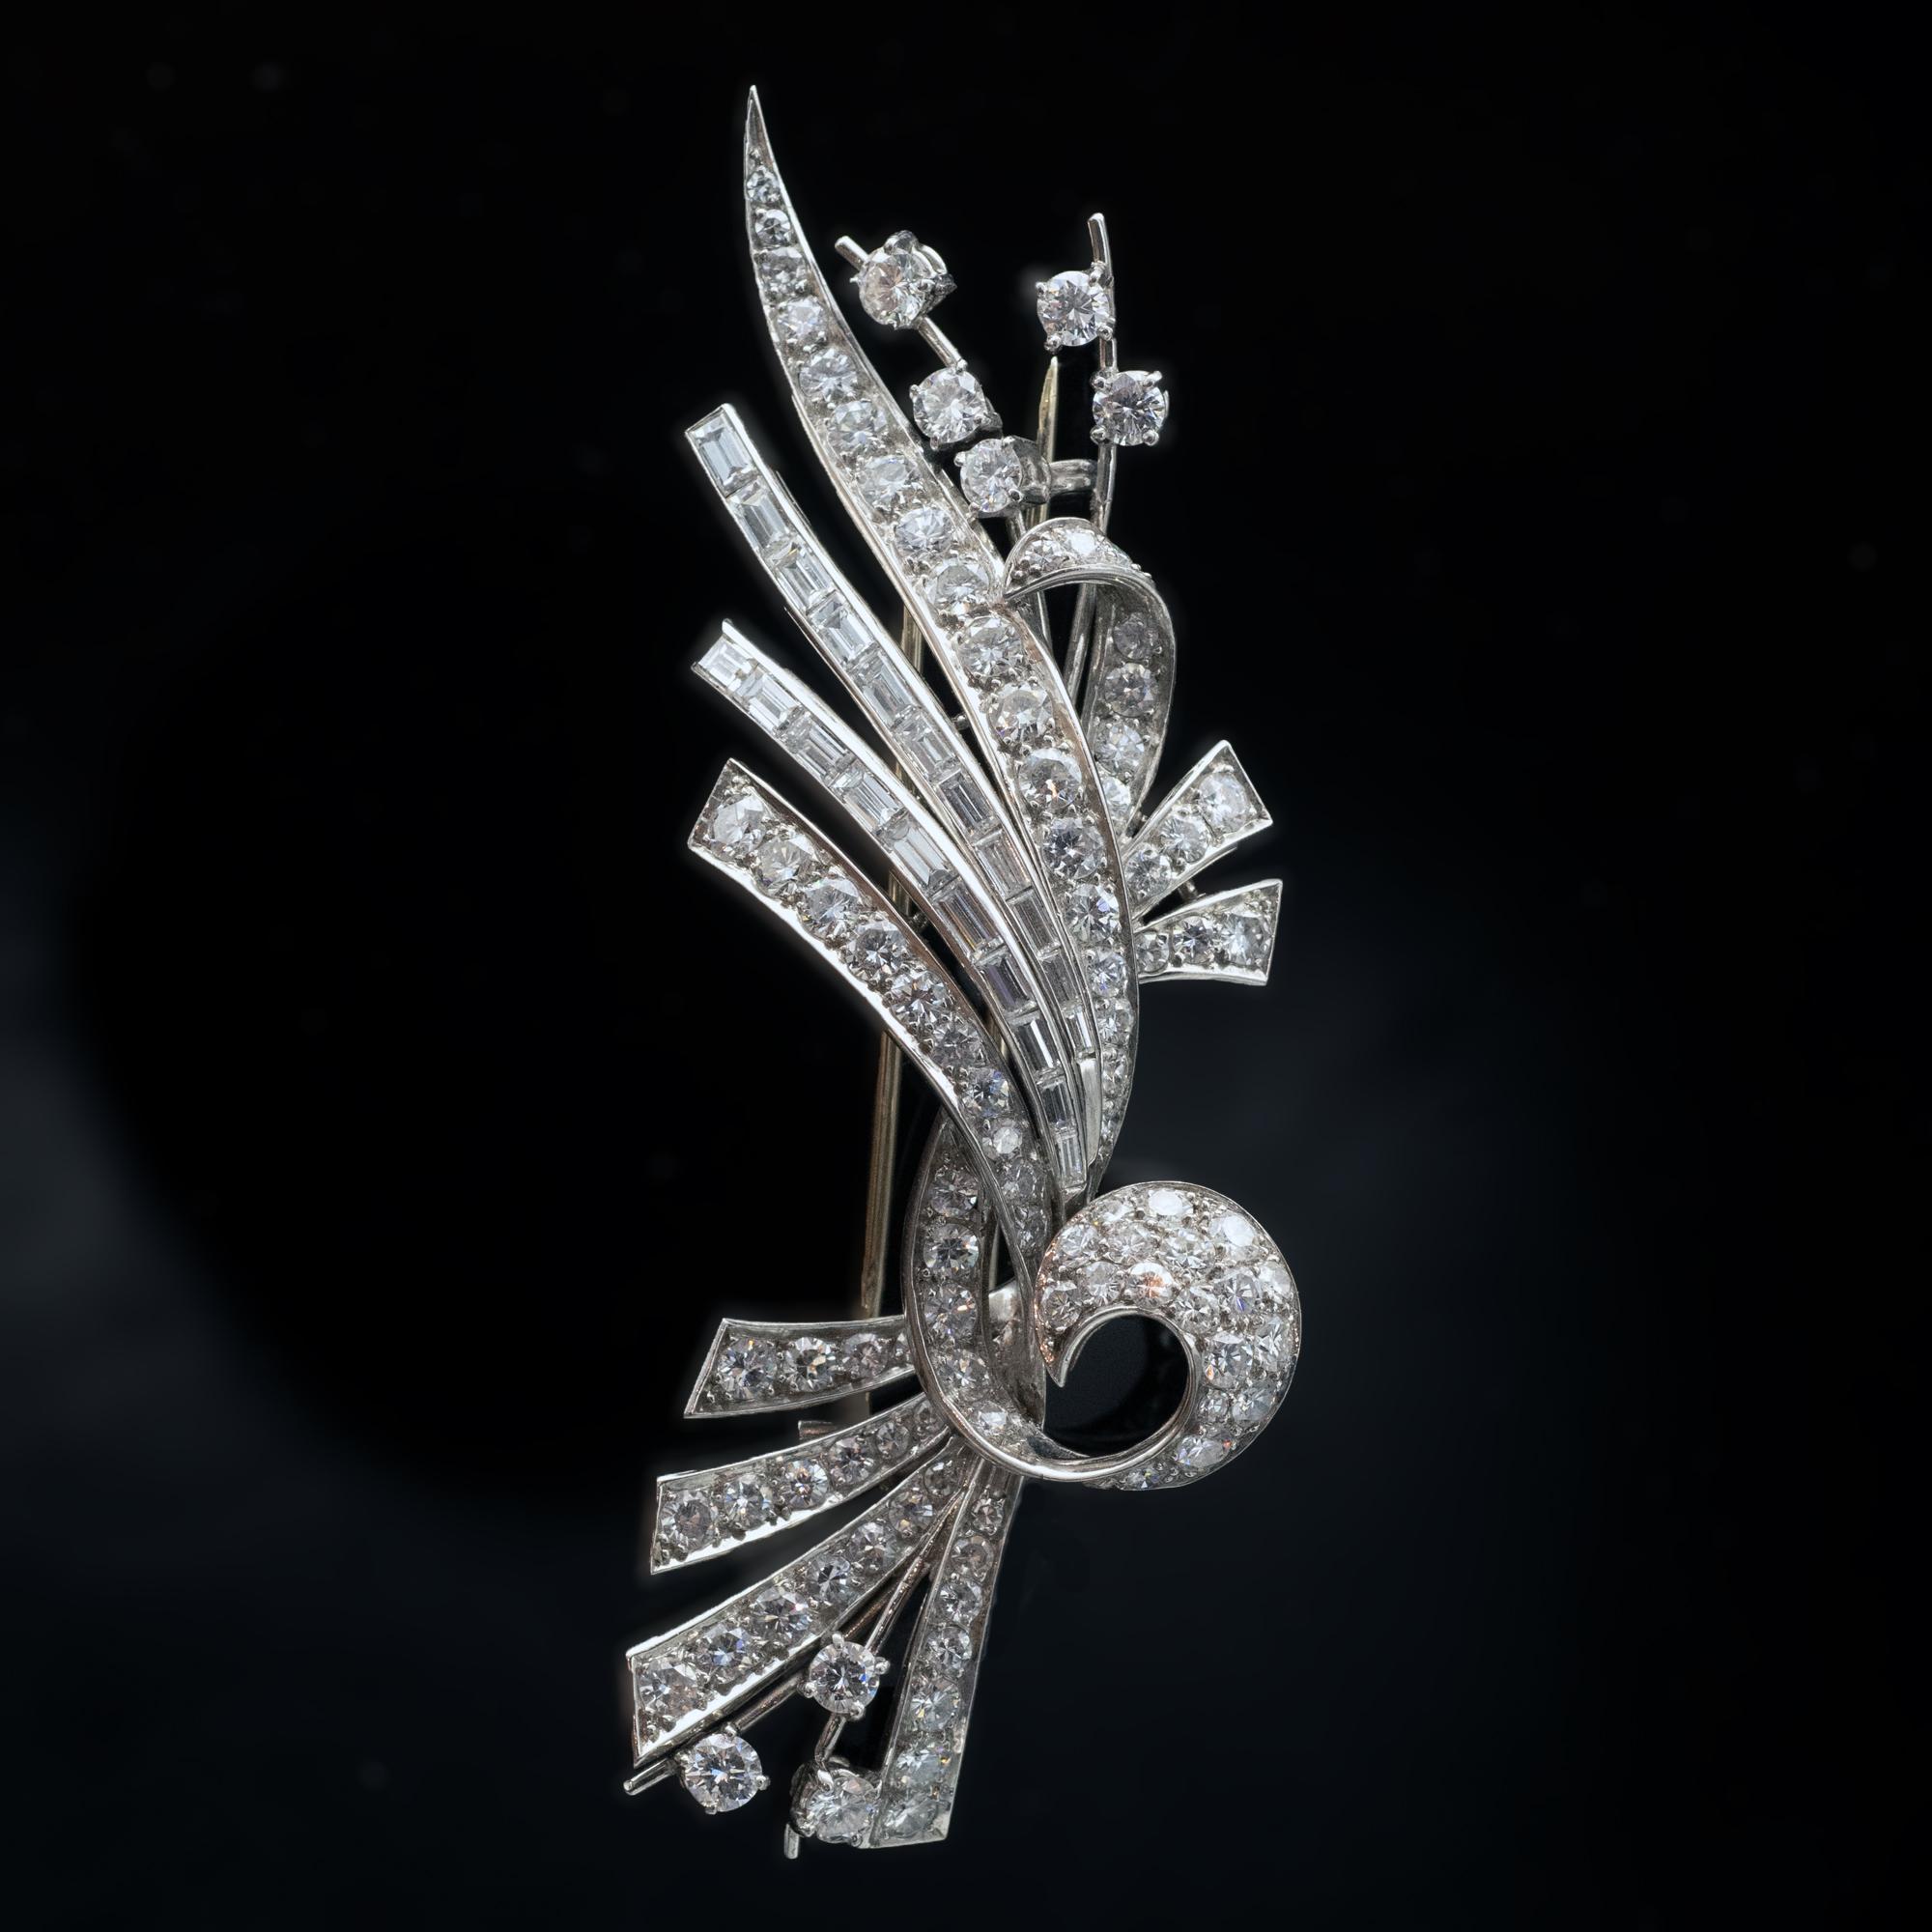 This platinum and diamond brooch has truly elegance and movement in its design. The diamonds, baguette and round are FG VS and weigh approximately 6.5 carat. Yhe make and condition are excellent. The brooch is in platinum but the actual pins are